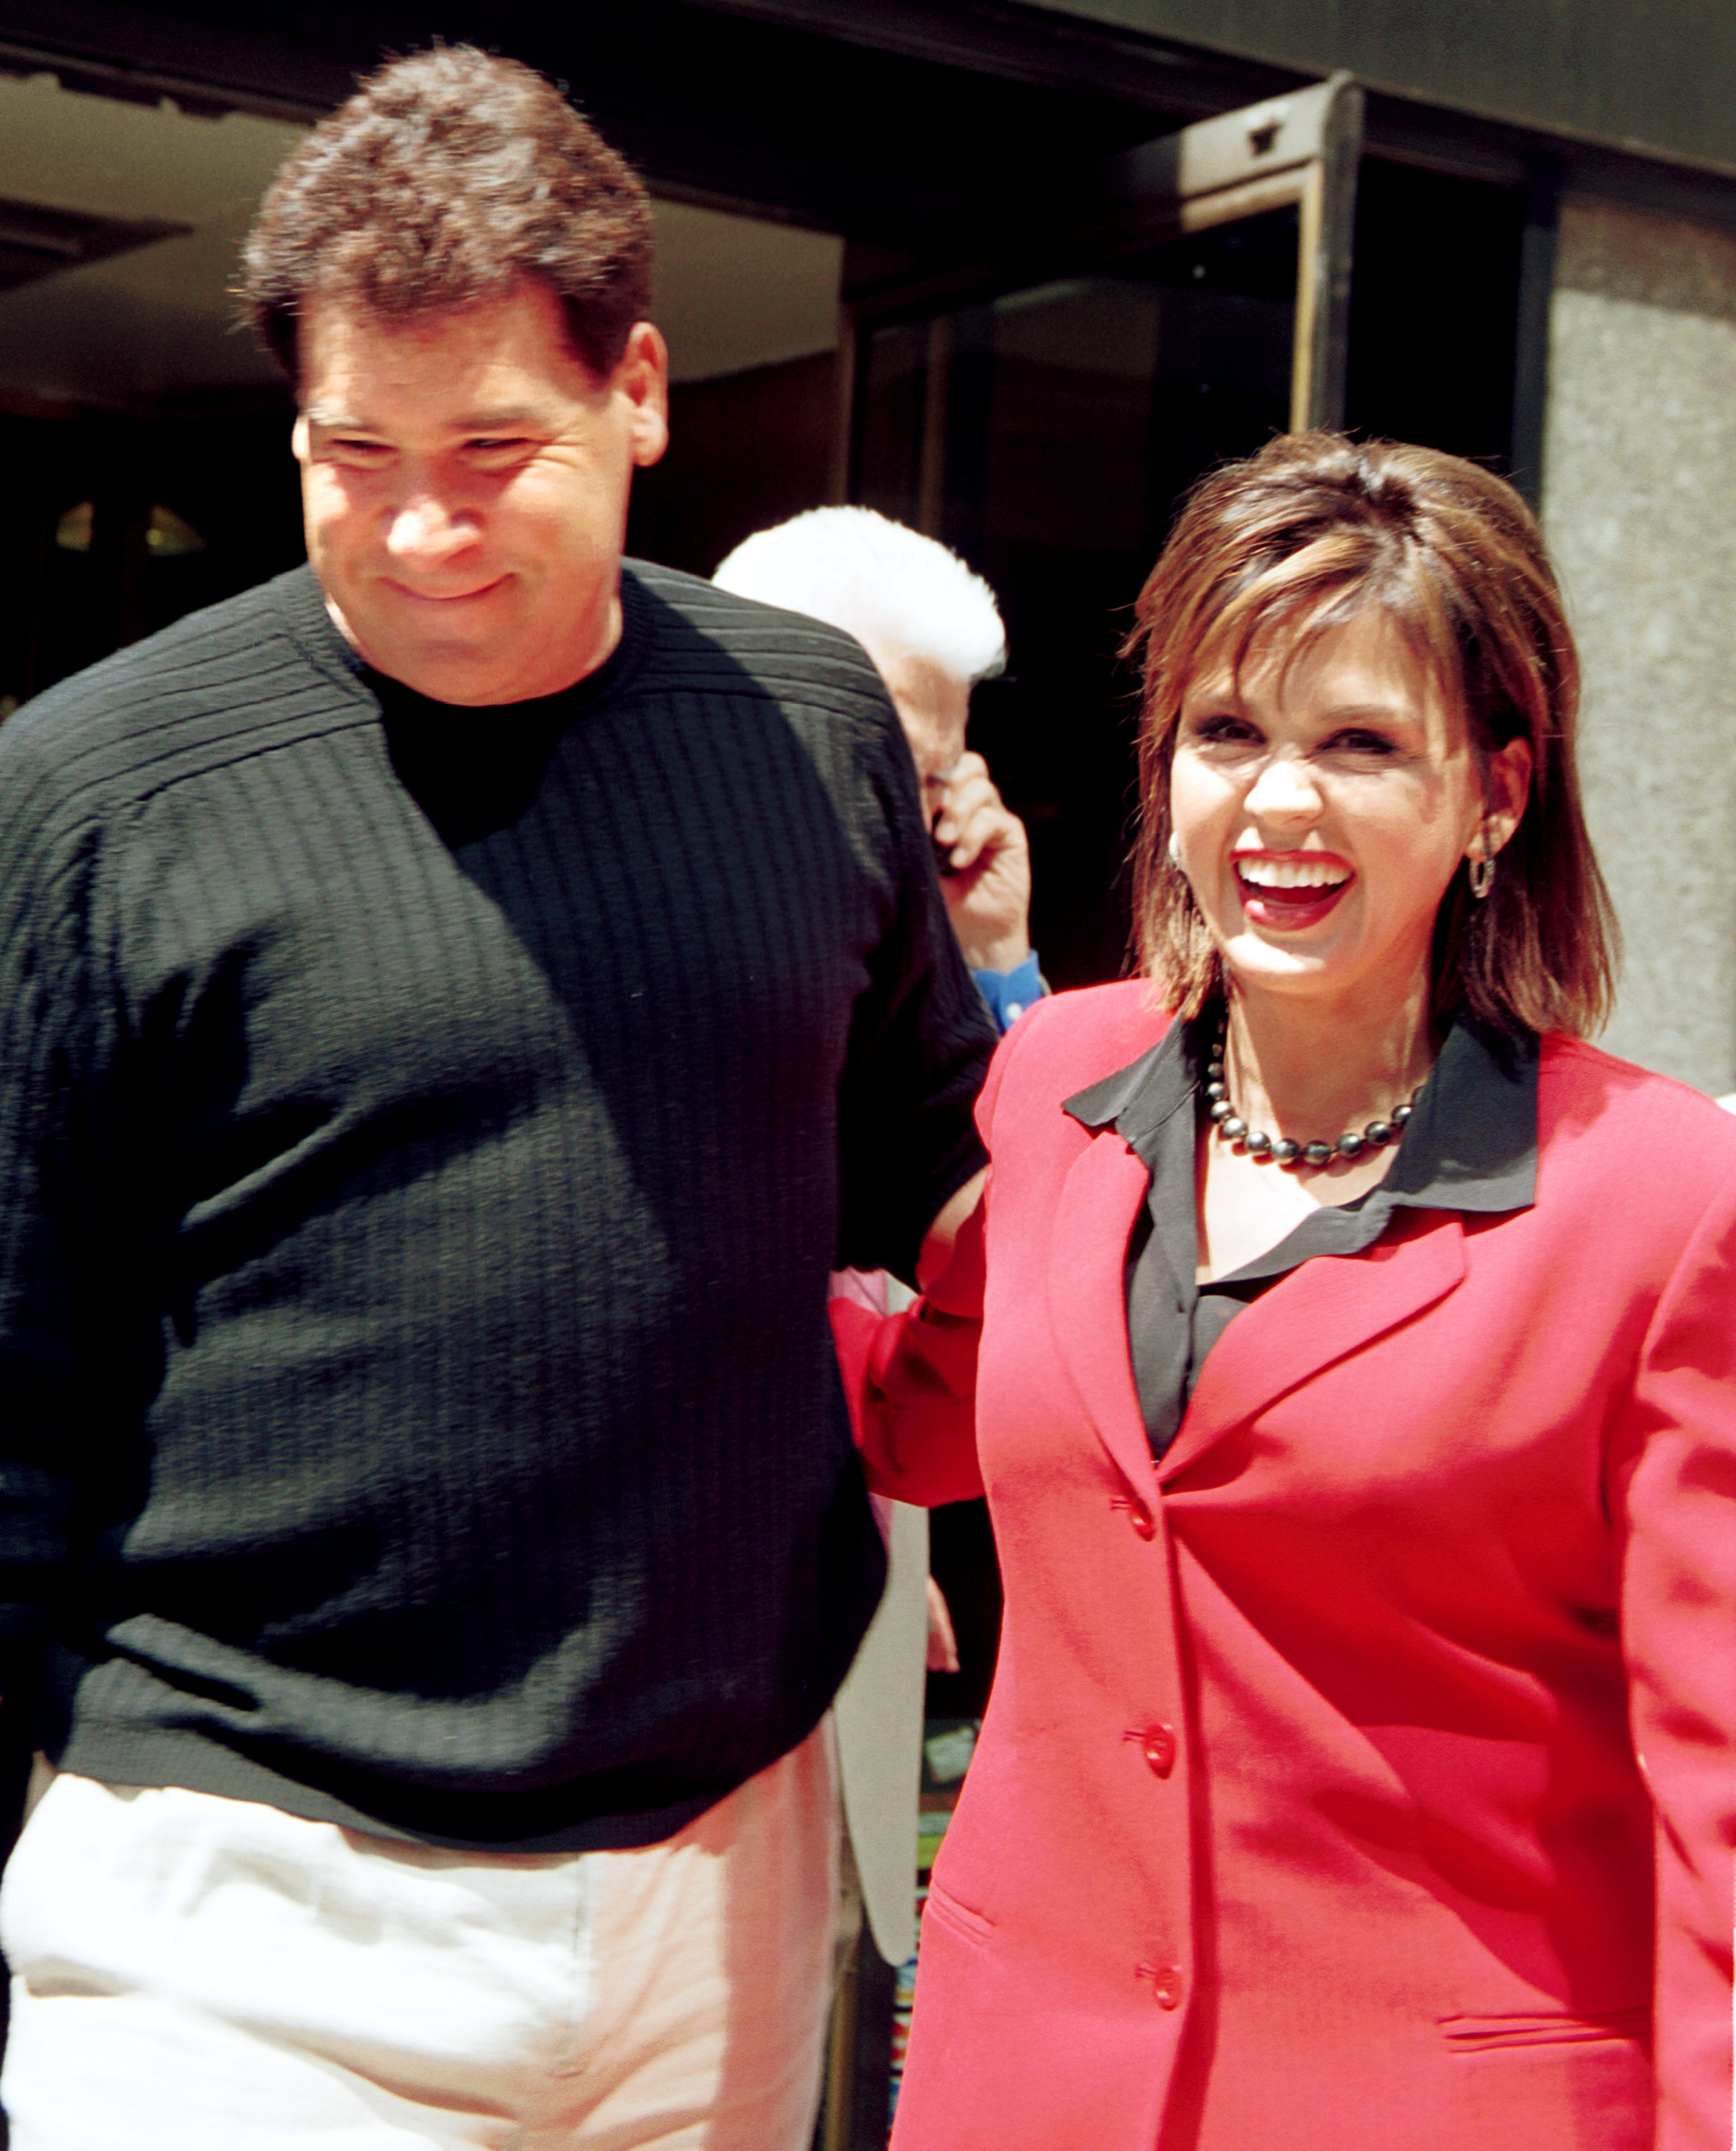 Marie Osmond and Brian Blosil in New York in 2001 | Source: Getty Images